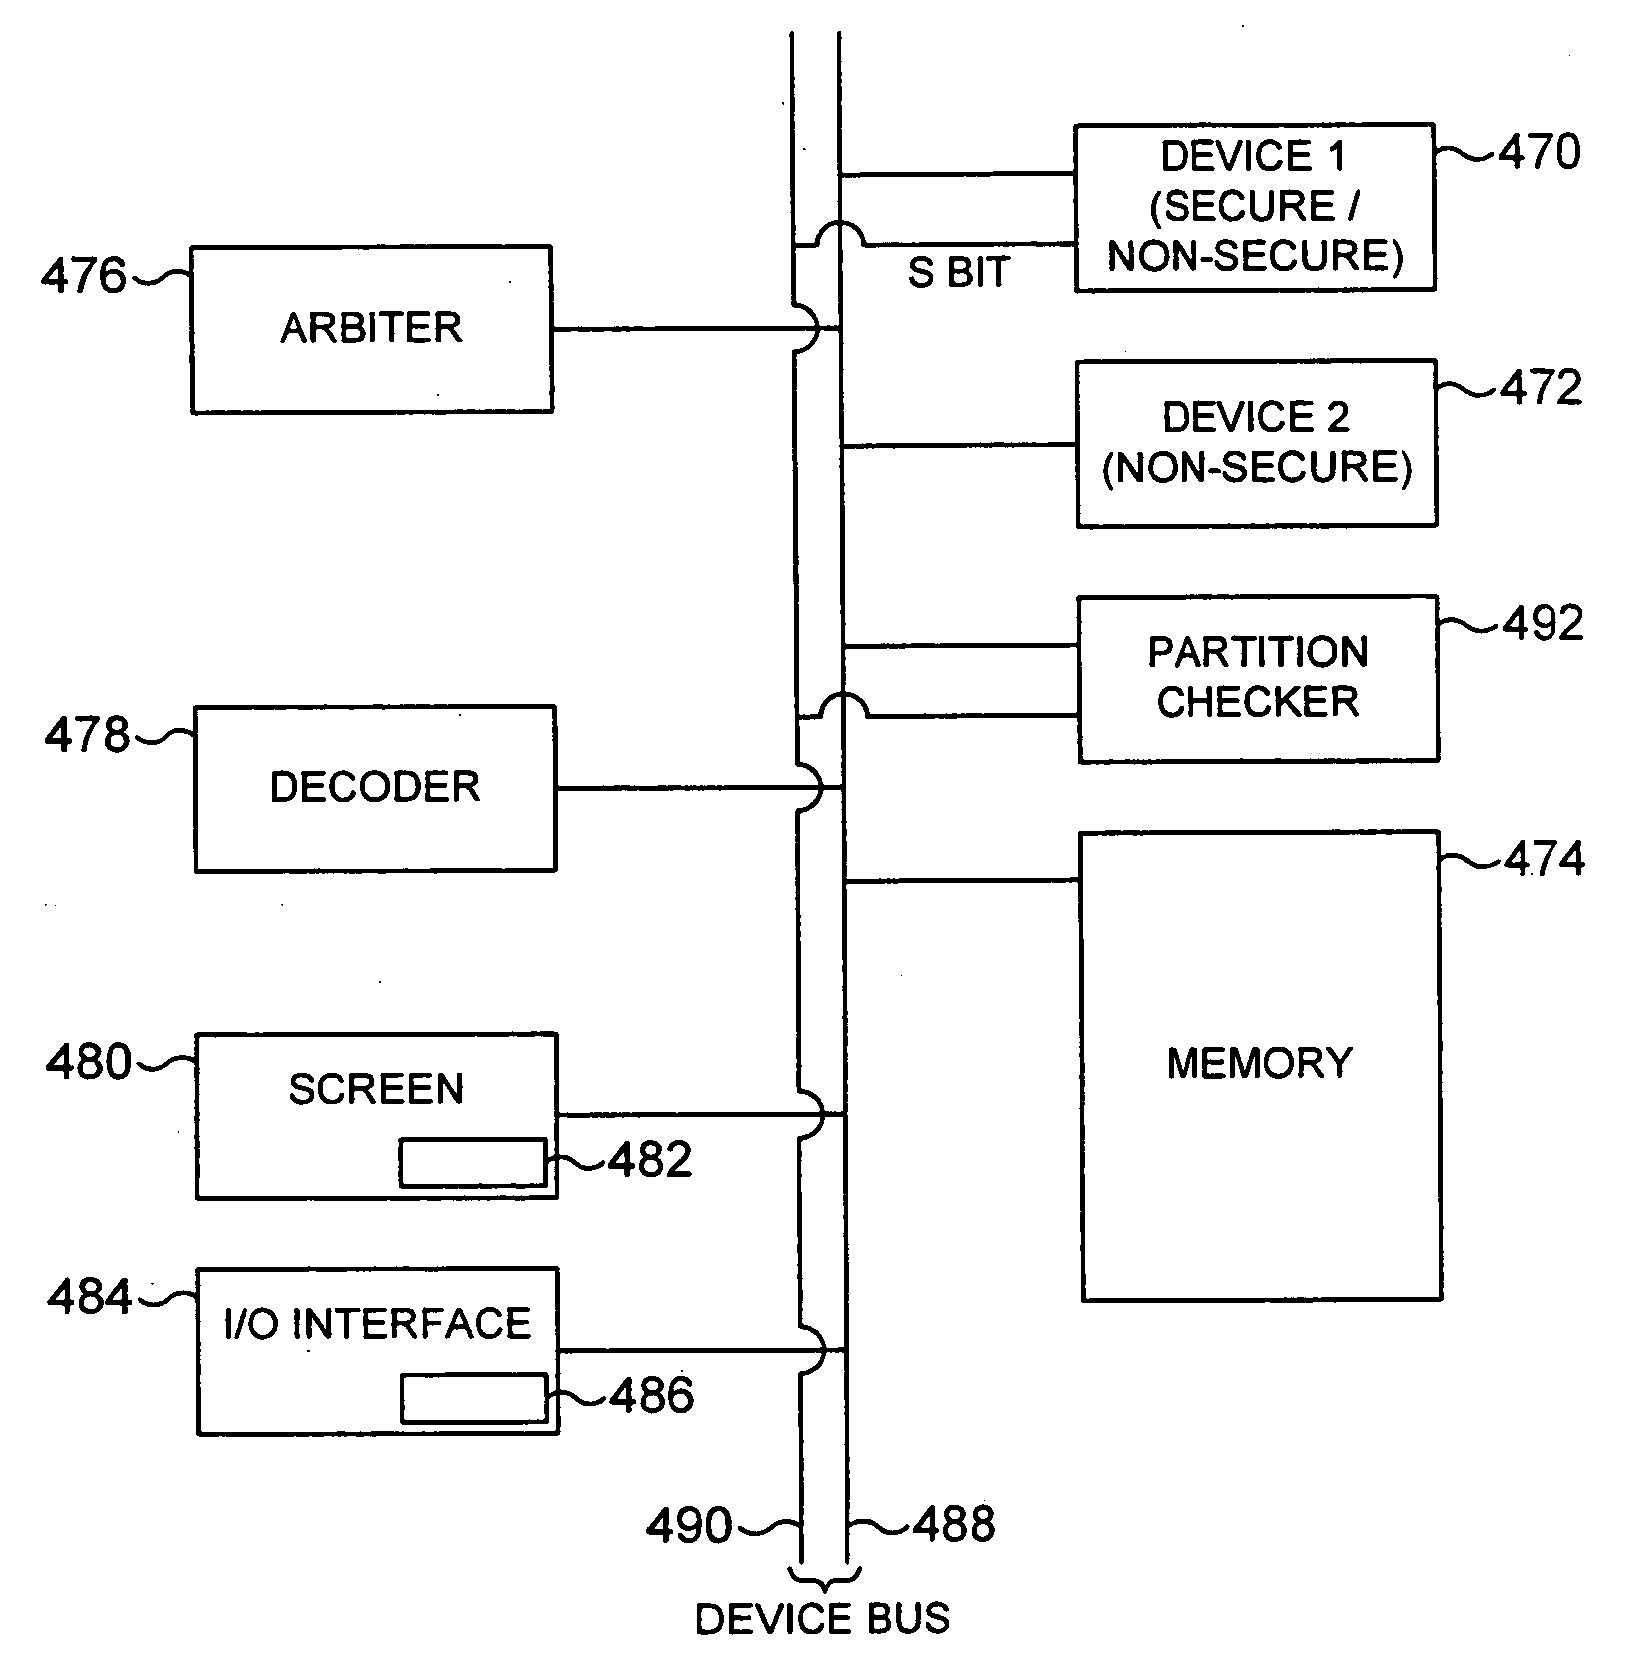 Control of access to a memory by a device